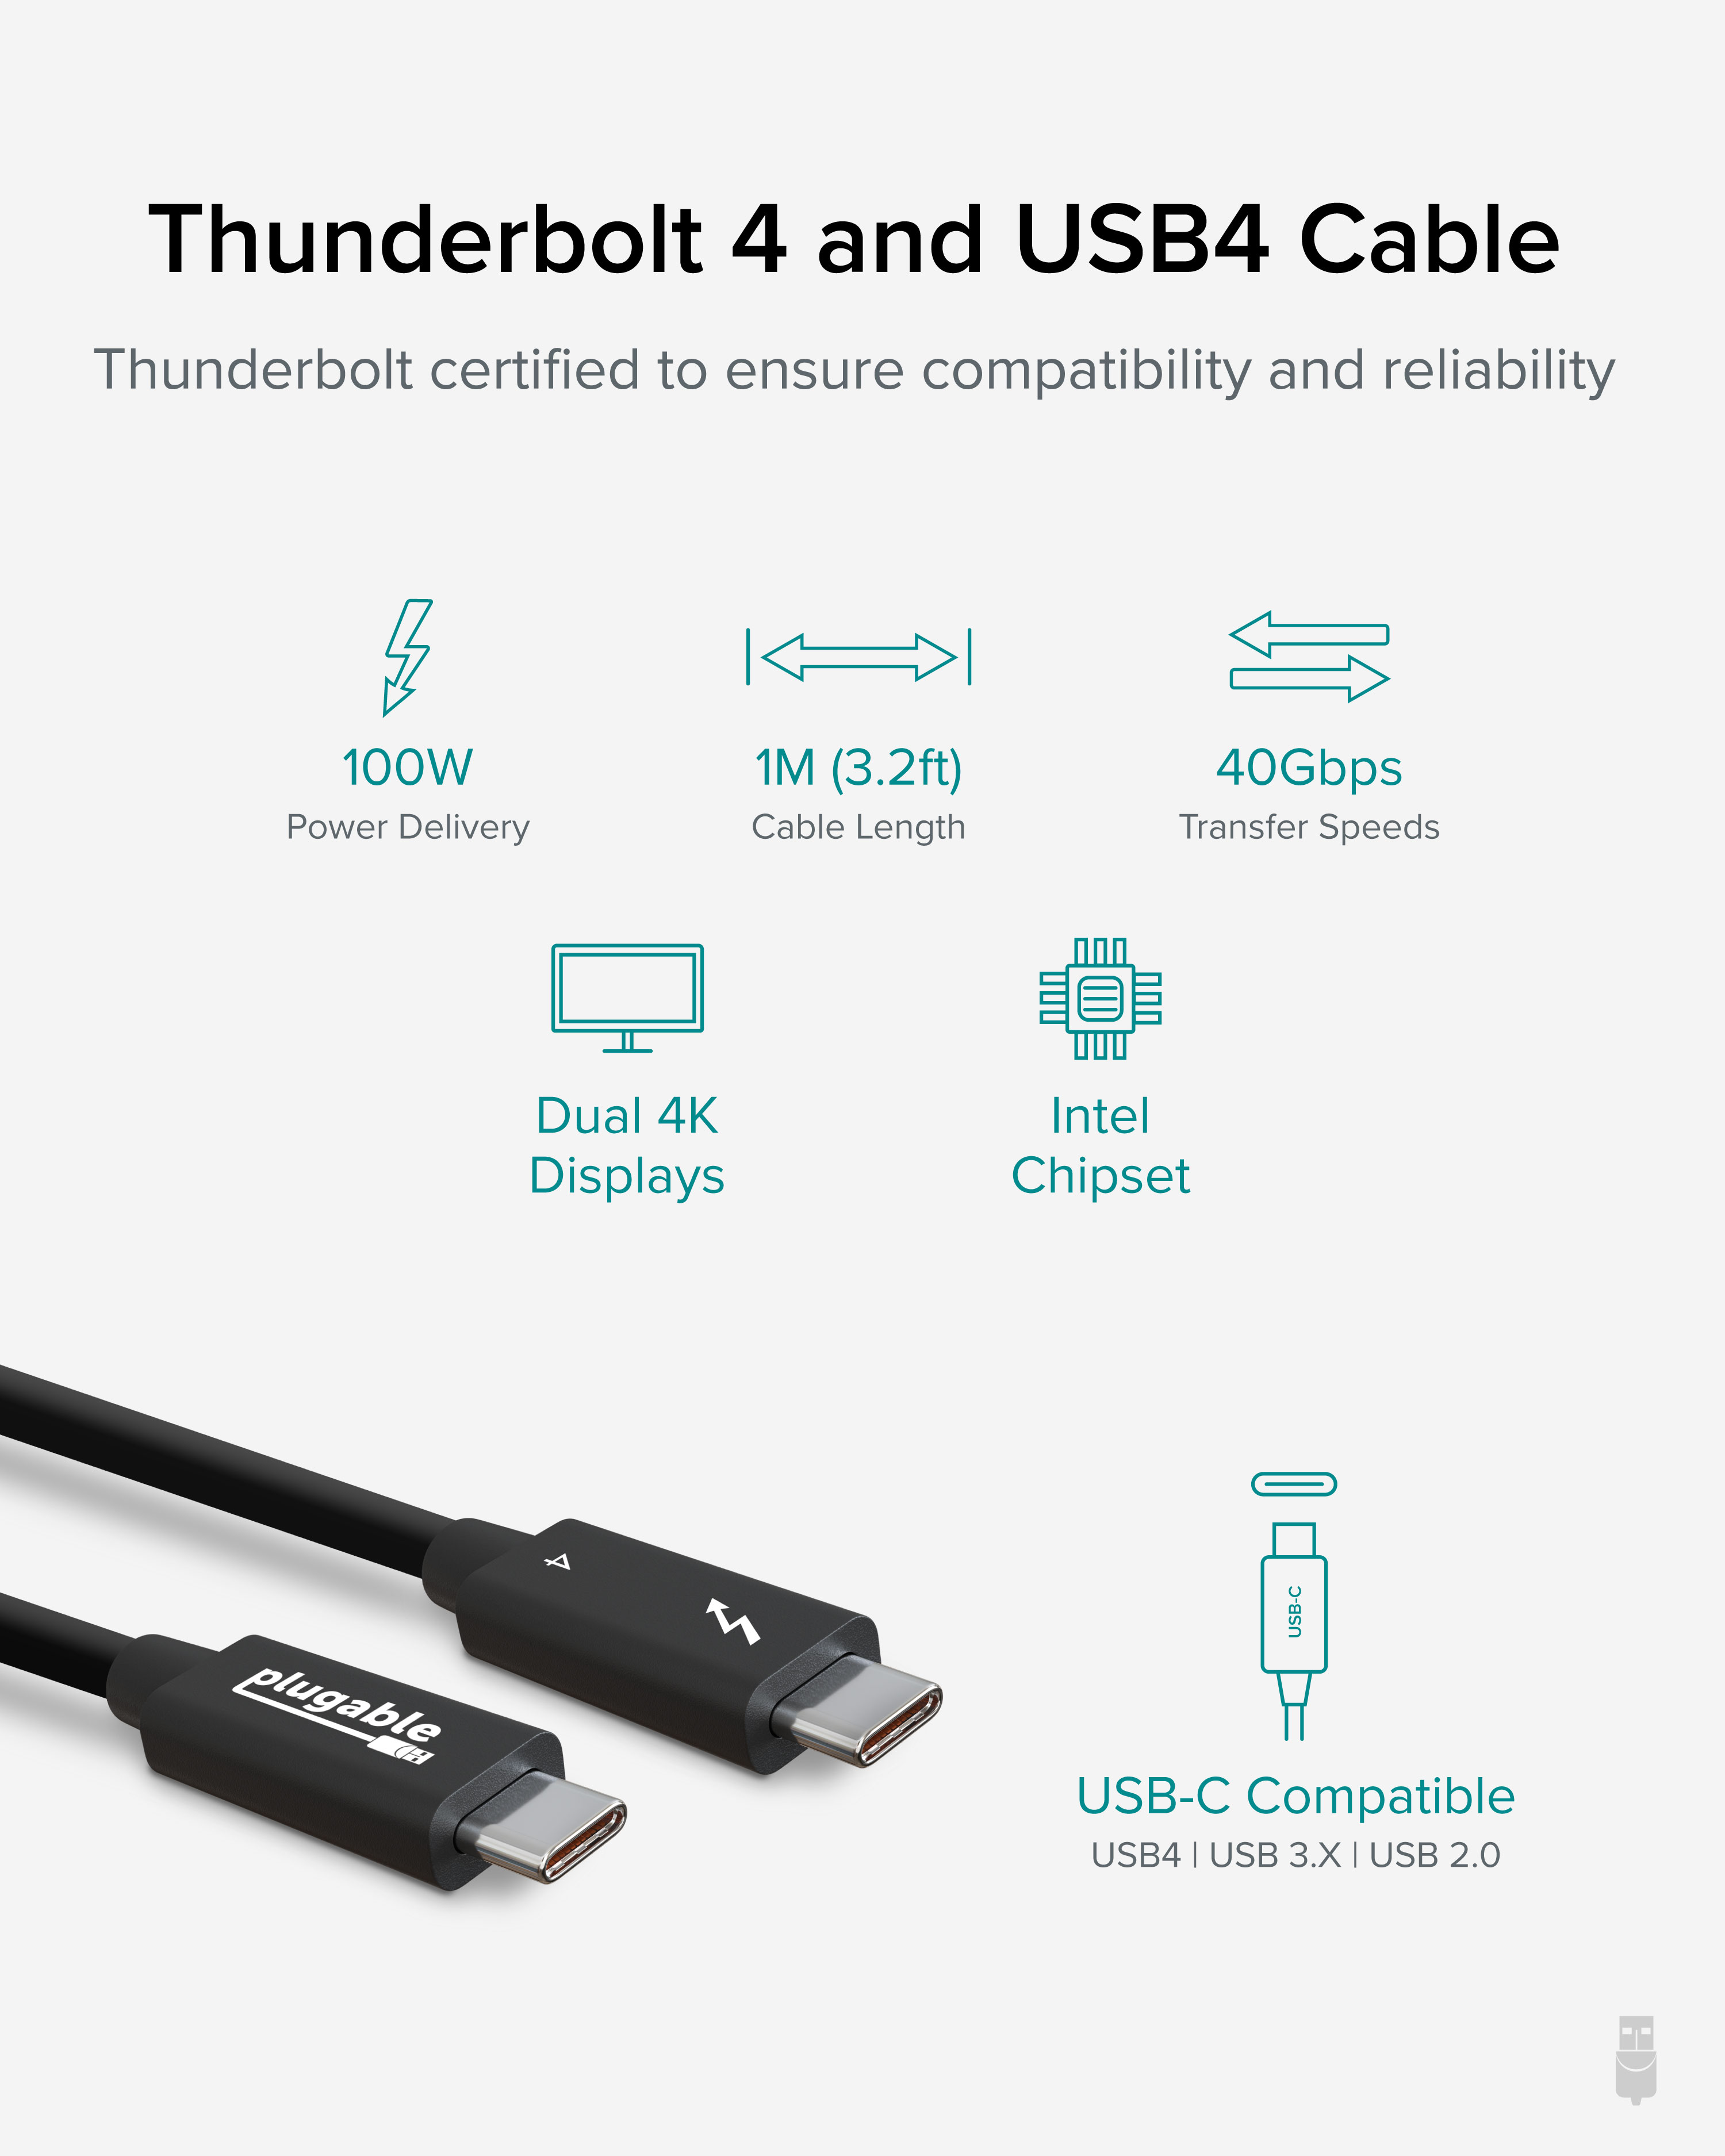 Plugable Thunderbolt 4 Cable [Thunderbolt Certified] 3.2ft USB4 Cable with 100W Charging, Single 8K or Dual 4K Displays, 40Gbps Data Transfer, Compatible with Thunderbolt 4, USB4, Thunderbolt 3, USB-C - image 3 of 7